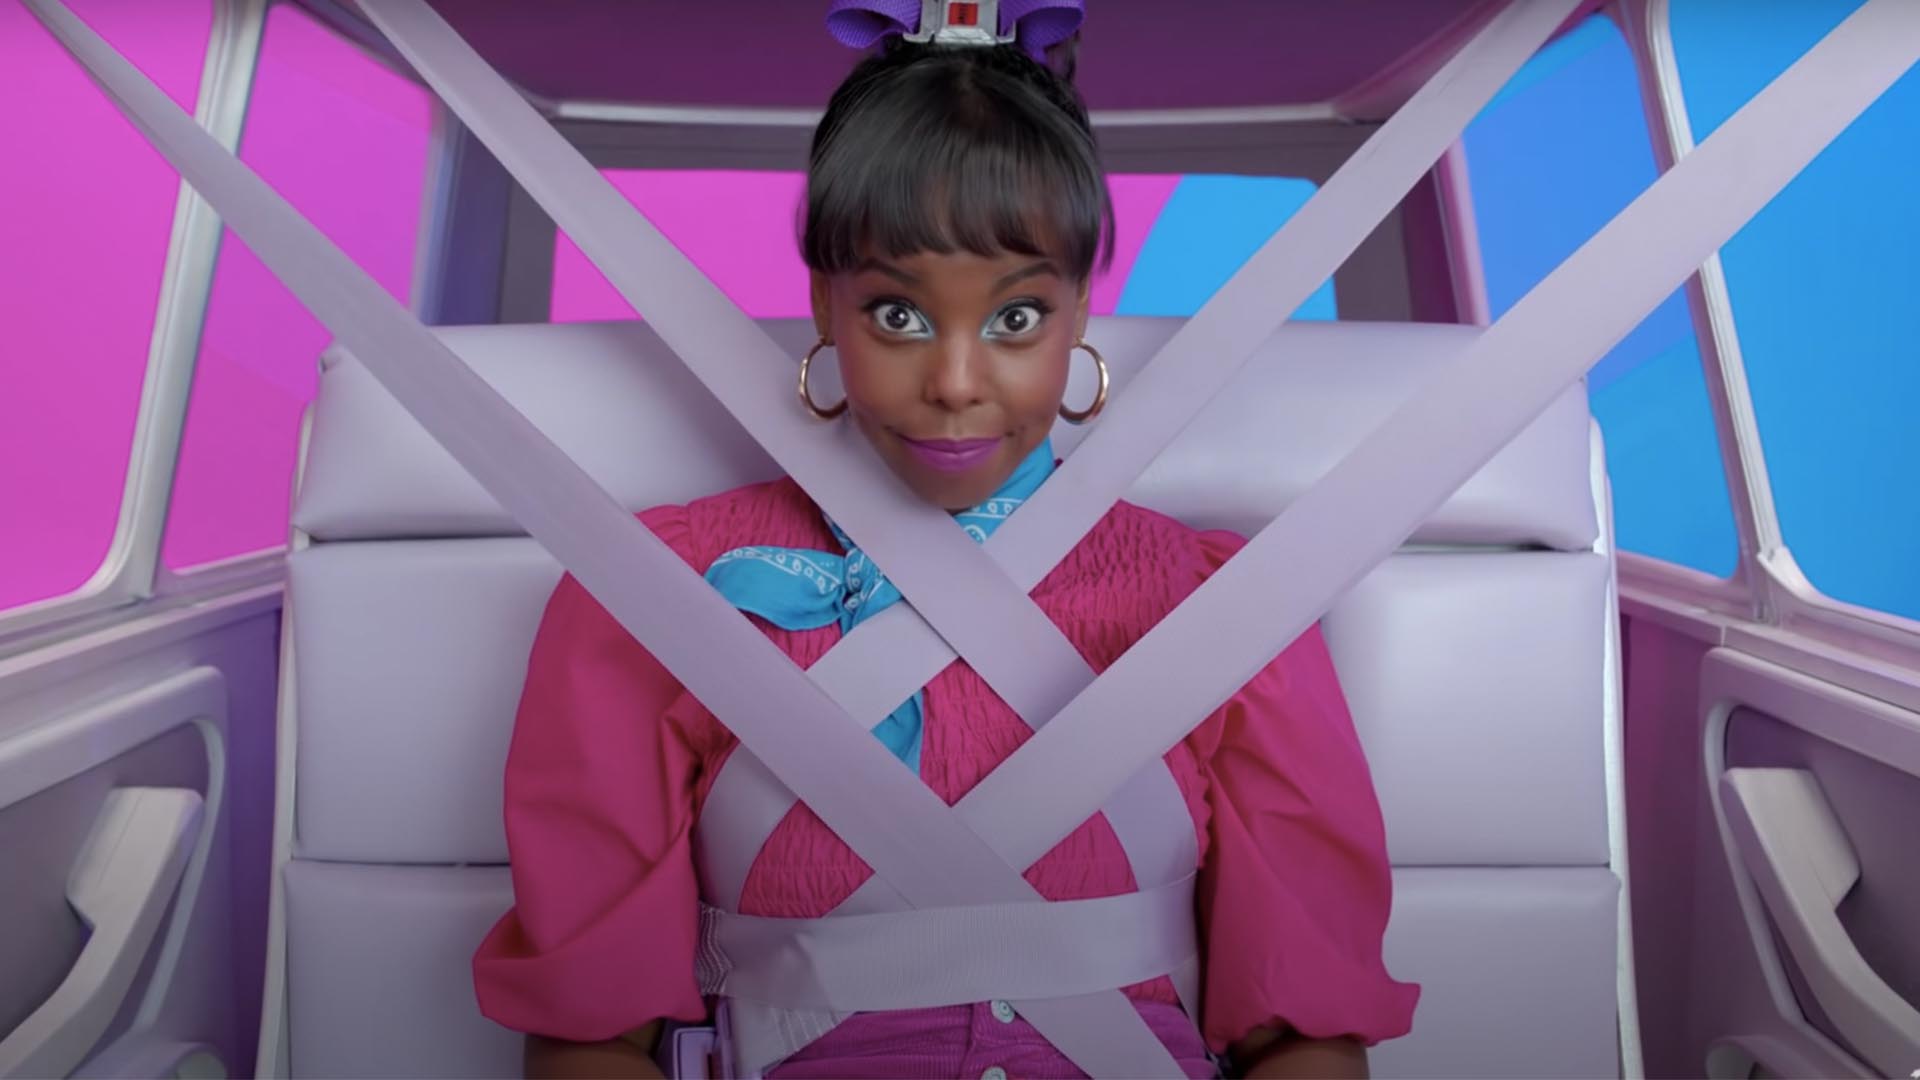 A person comically over-strapped to the seat of a car with a bright pink and blue background